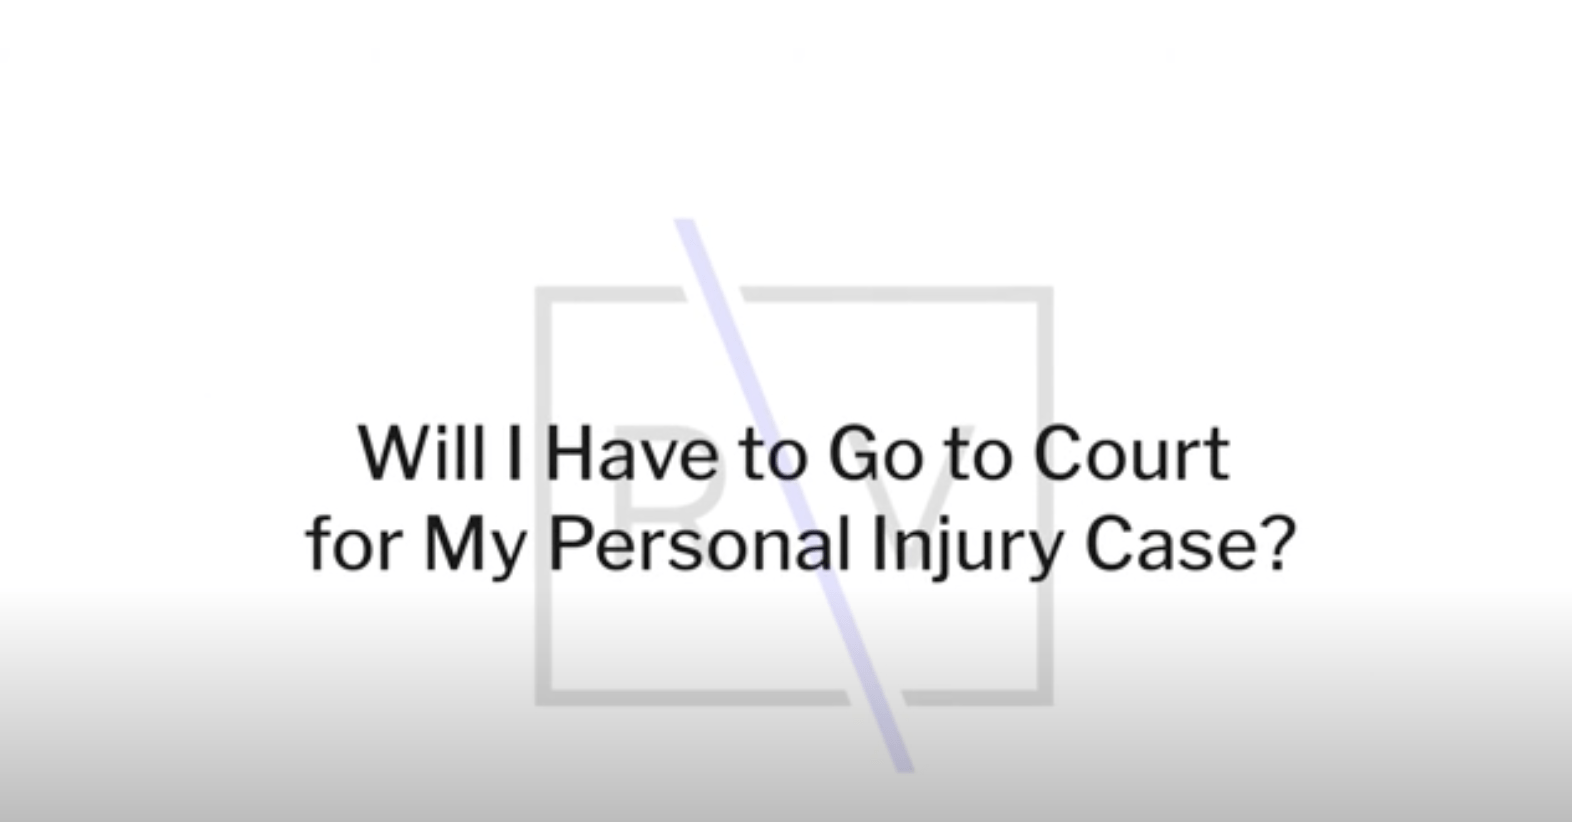 Will I Have to Go to Court for My Personal Injury Case?